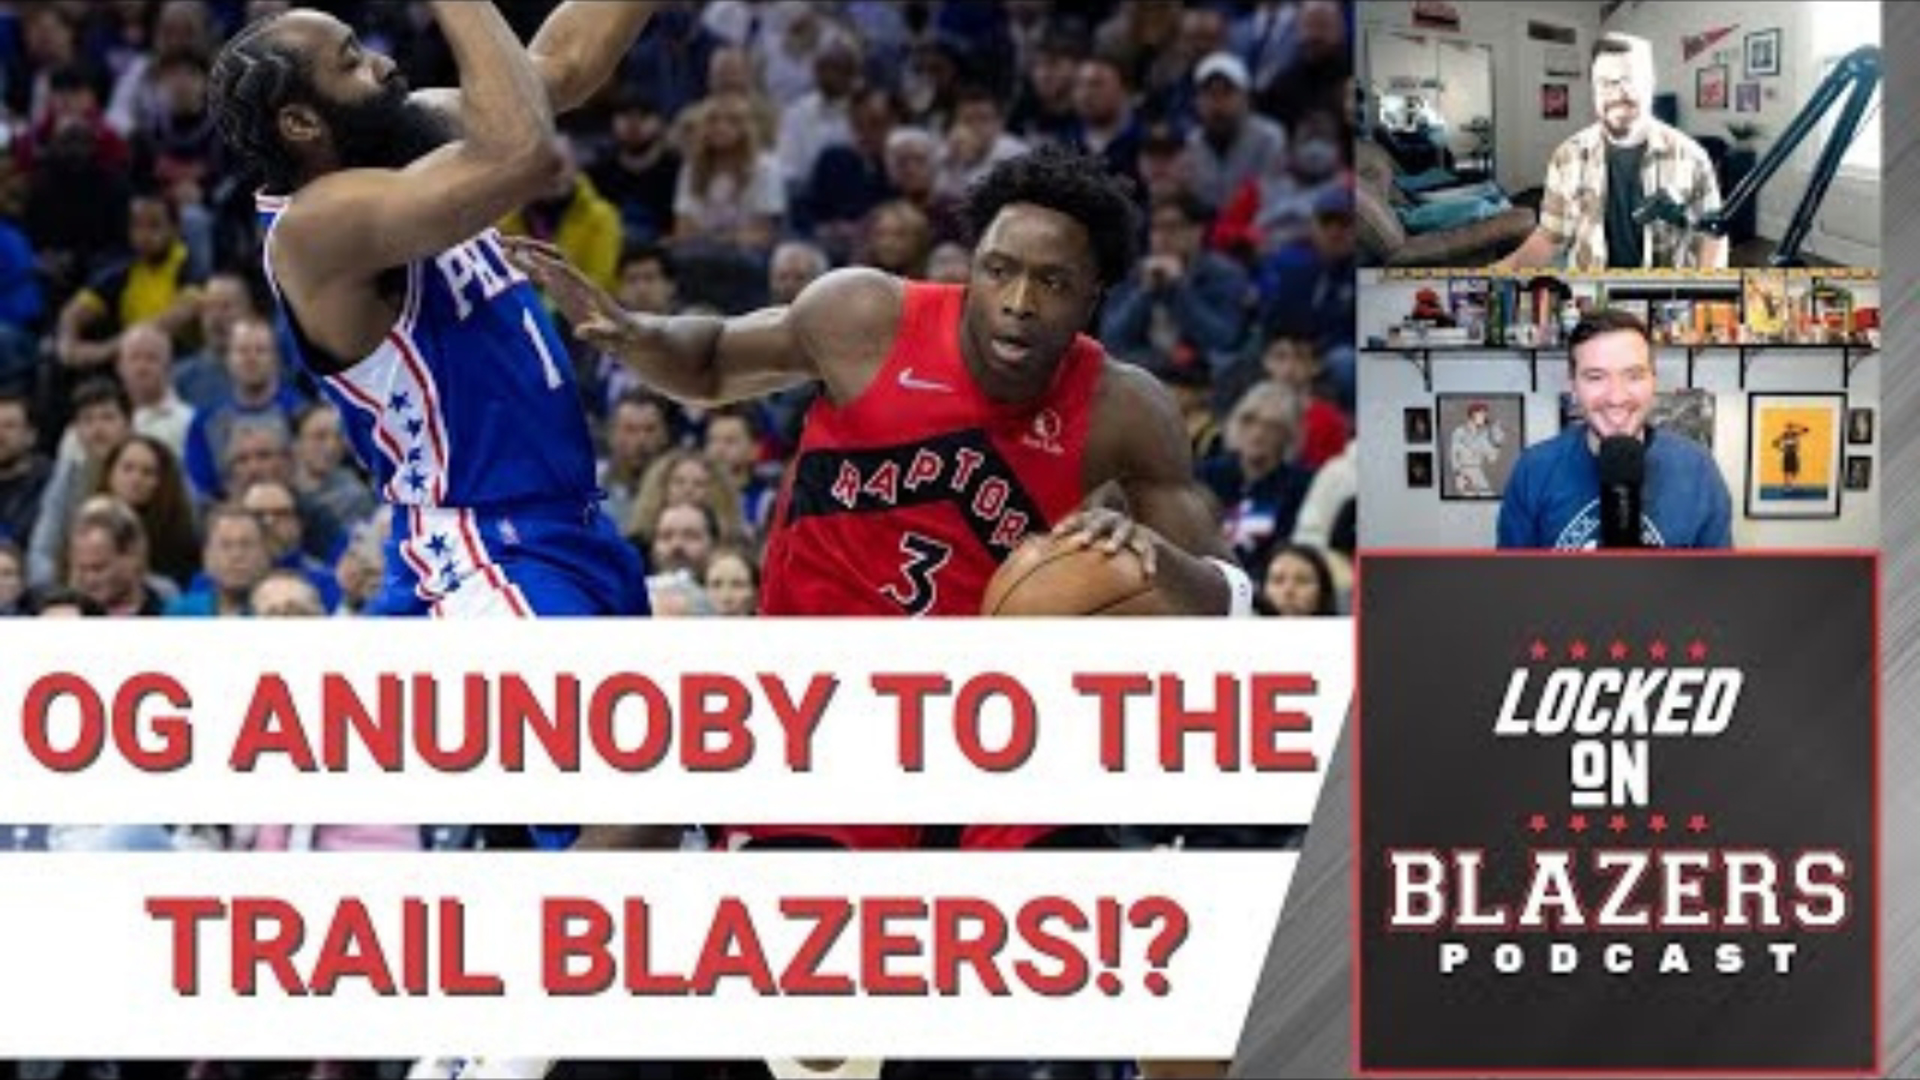 Sean Woodley of Locked On Raptors joins the show to talk all things OG Anunoby and the rumored trade interest from the Portland Trail Blazers.